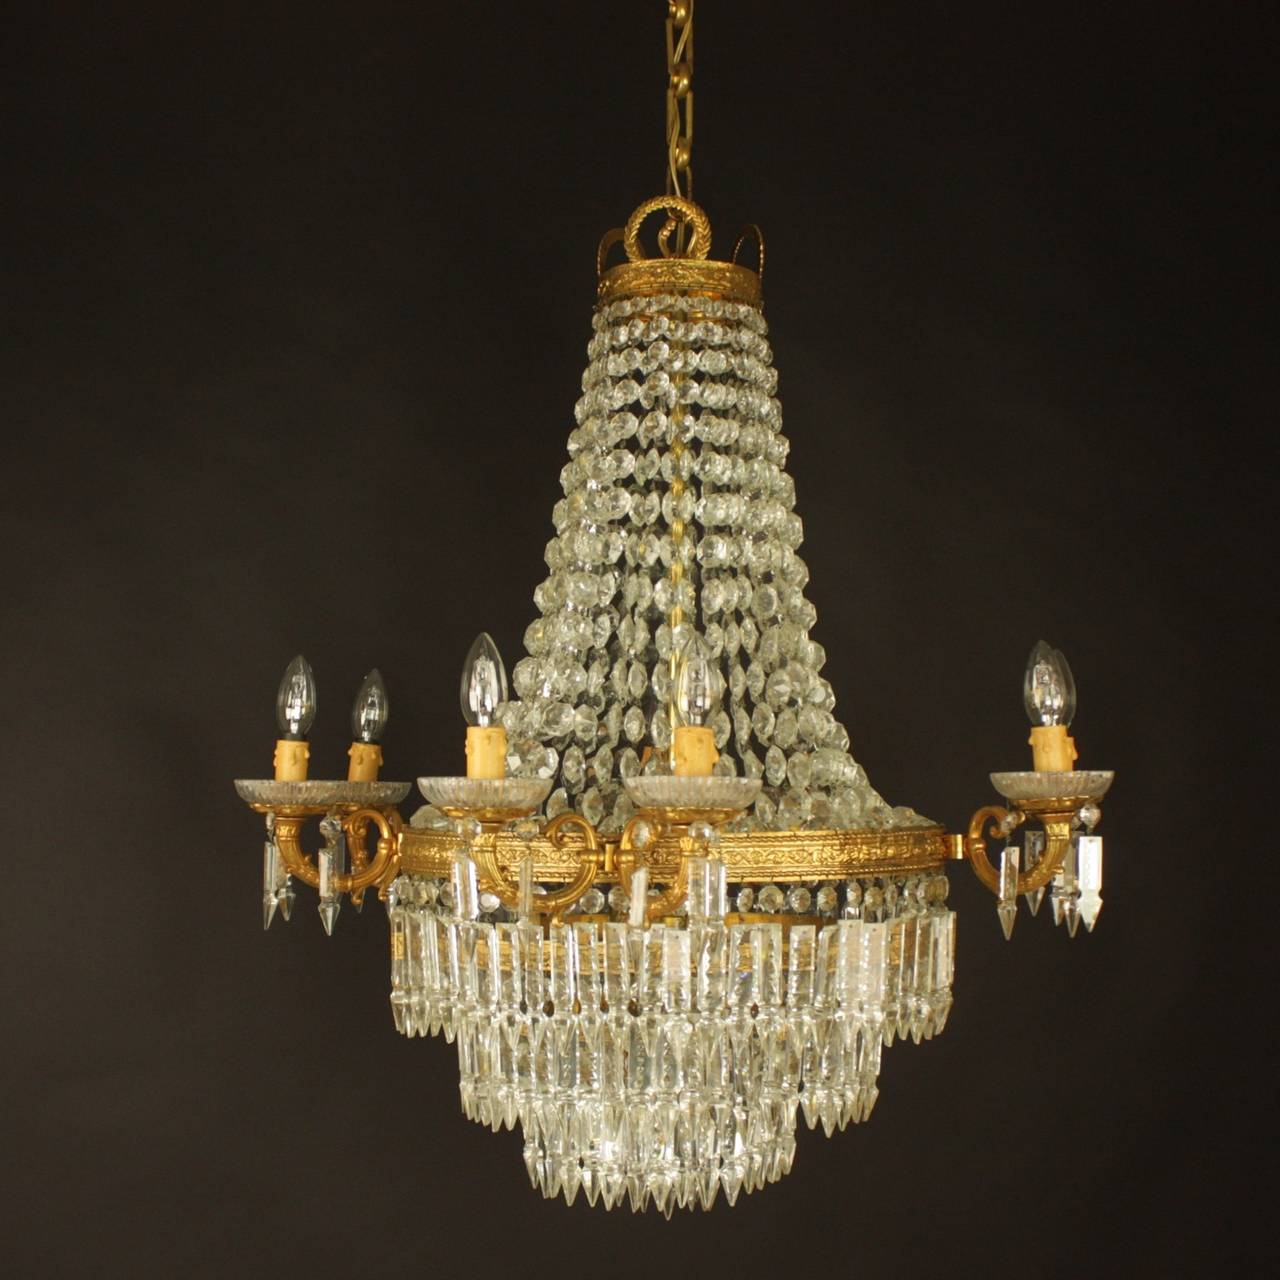 The circular top corona hang with facetted drops, with a central tier decorated with foliate, fitted with eight scrolled candle branches with suspended prism drops, the lower body consisting of three rows of prism drops with one interior light.